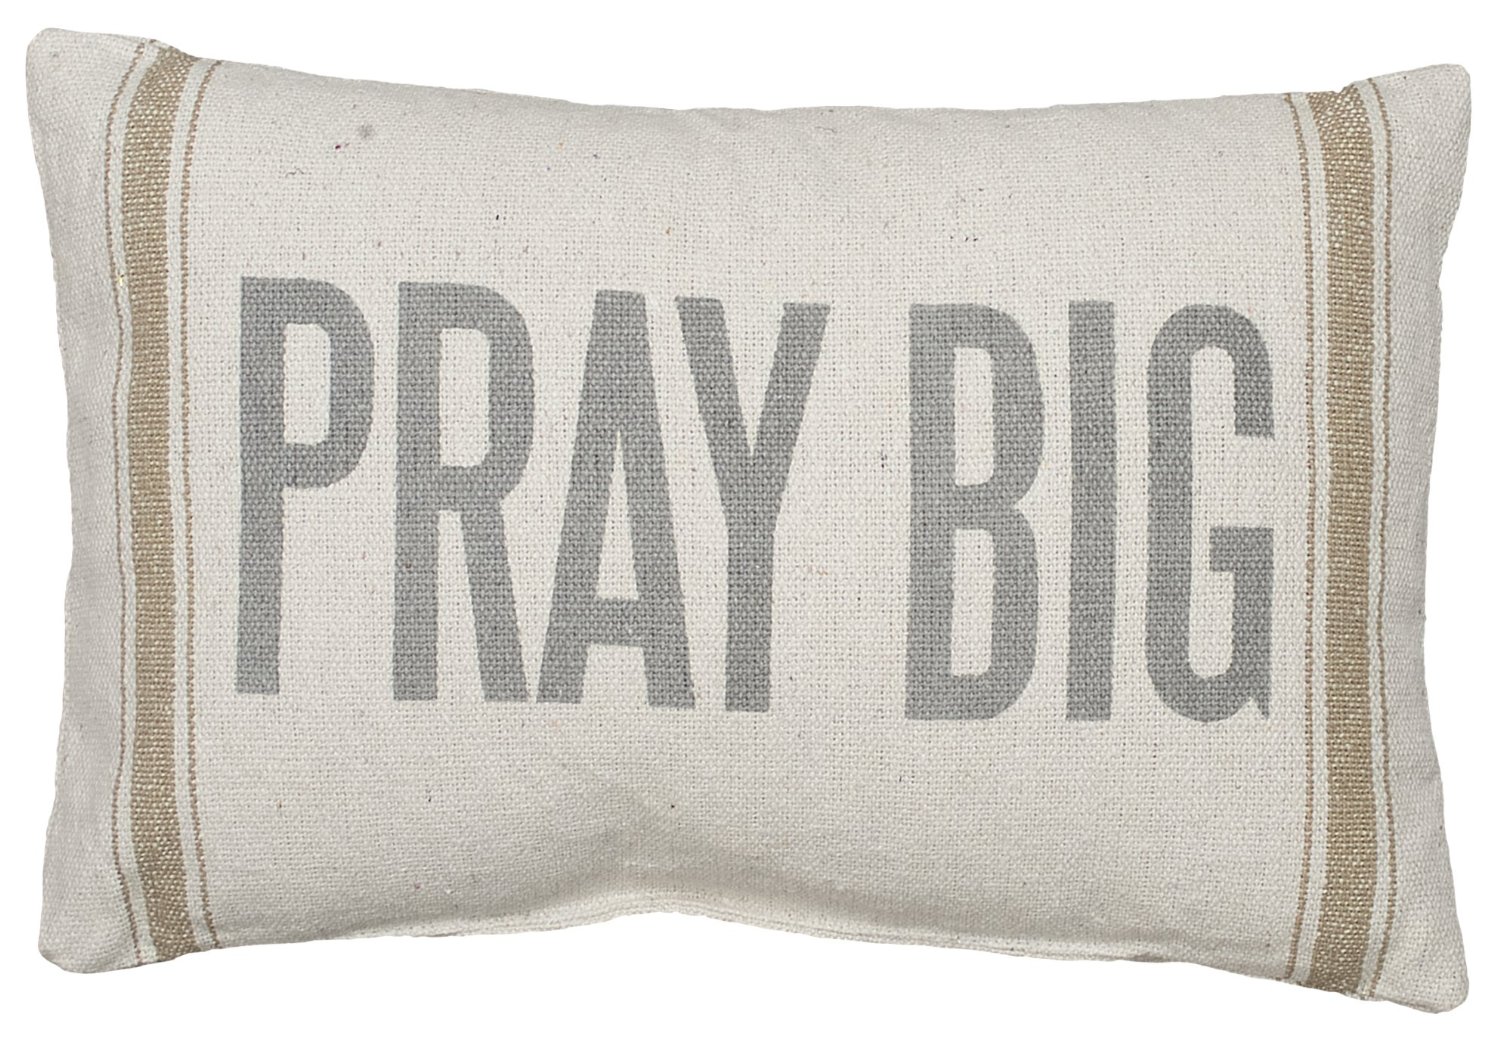 16 Farmhouse Style Pillows to Spruce up your Home Decor - and all available on Amazon!